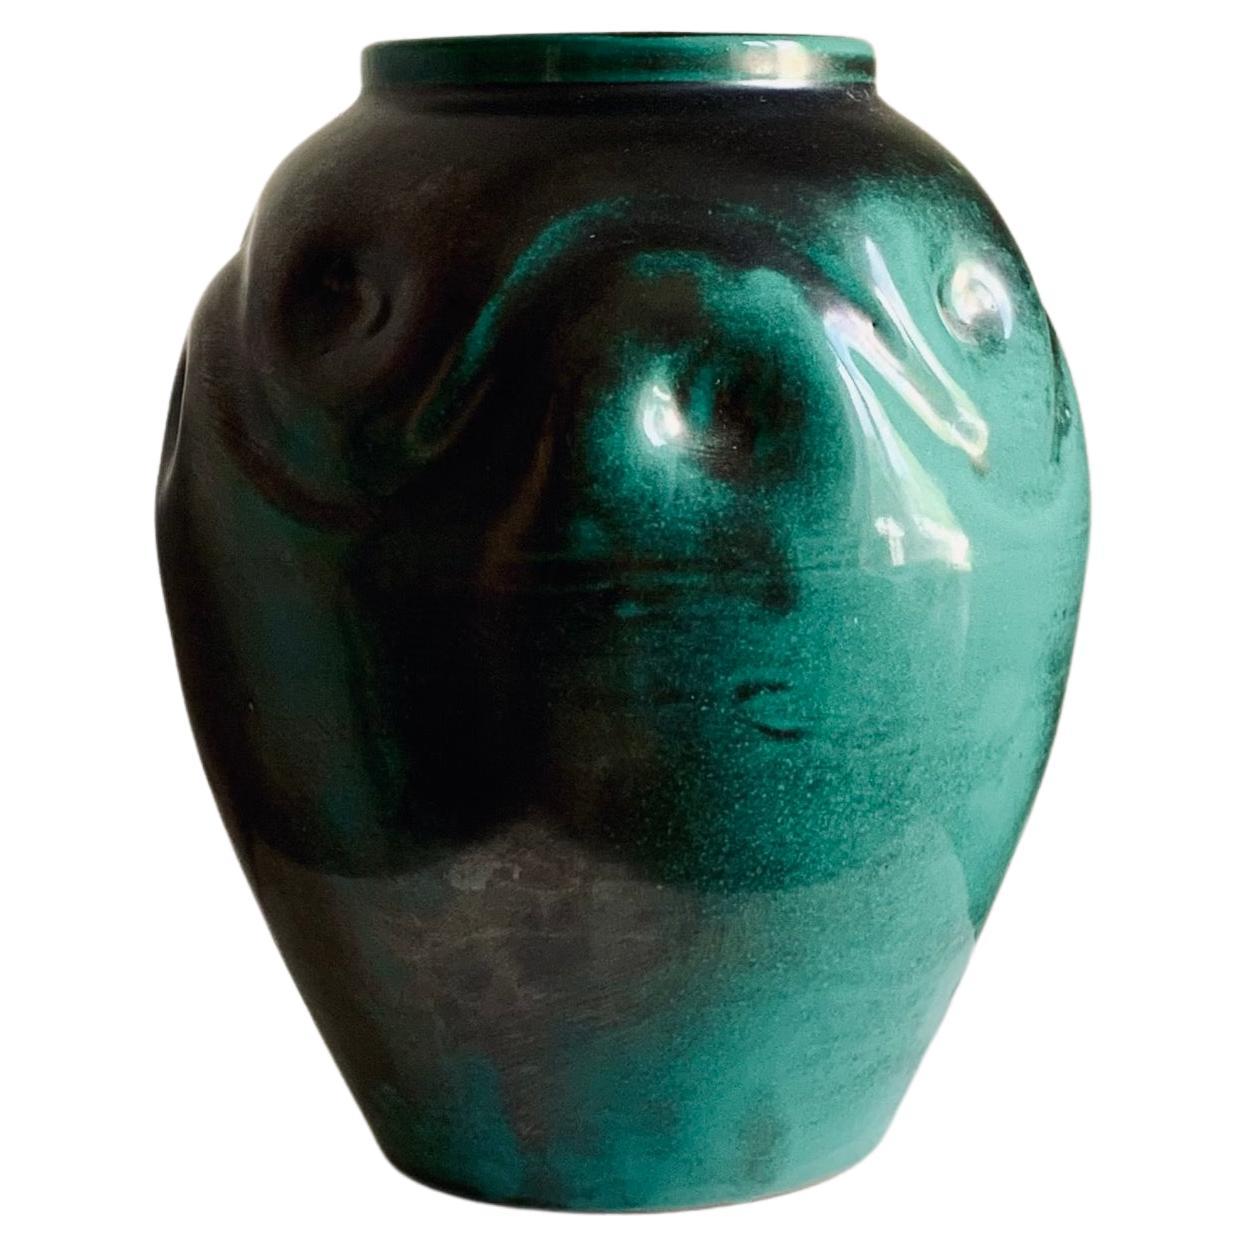 Swedish Modern sculptural earthenware vase with soft organic curves and green copper oxide glaze. Marked Ekeby 1500 (made between 1922-1938). This model vase is likely designed by Harald Östergren (1888-1974), who was employed at AB Upsala Ekeby